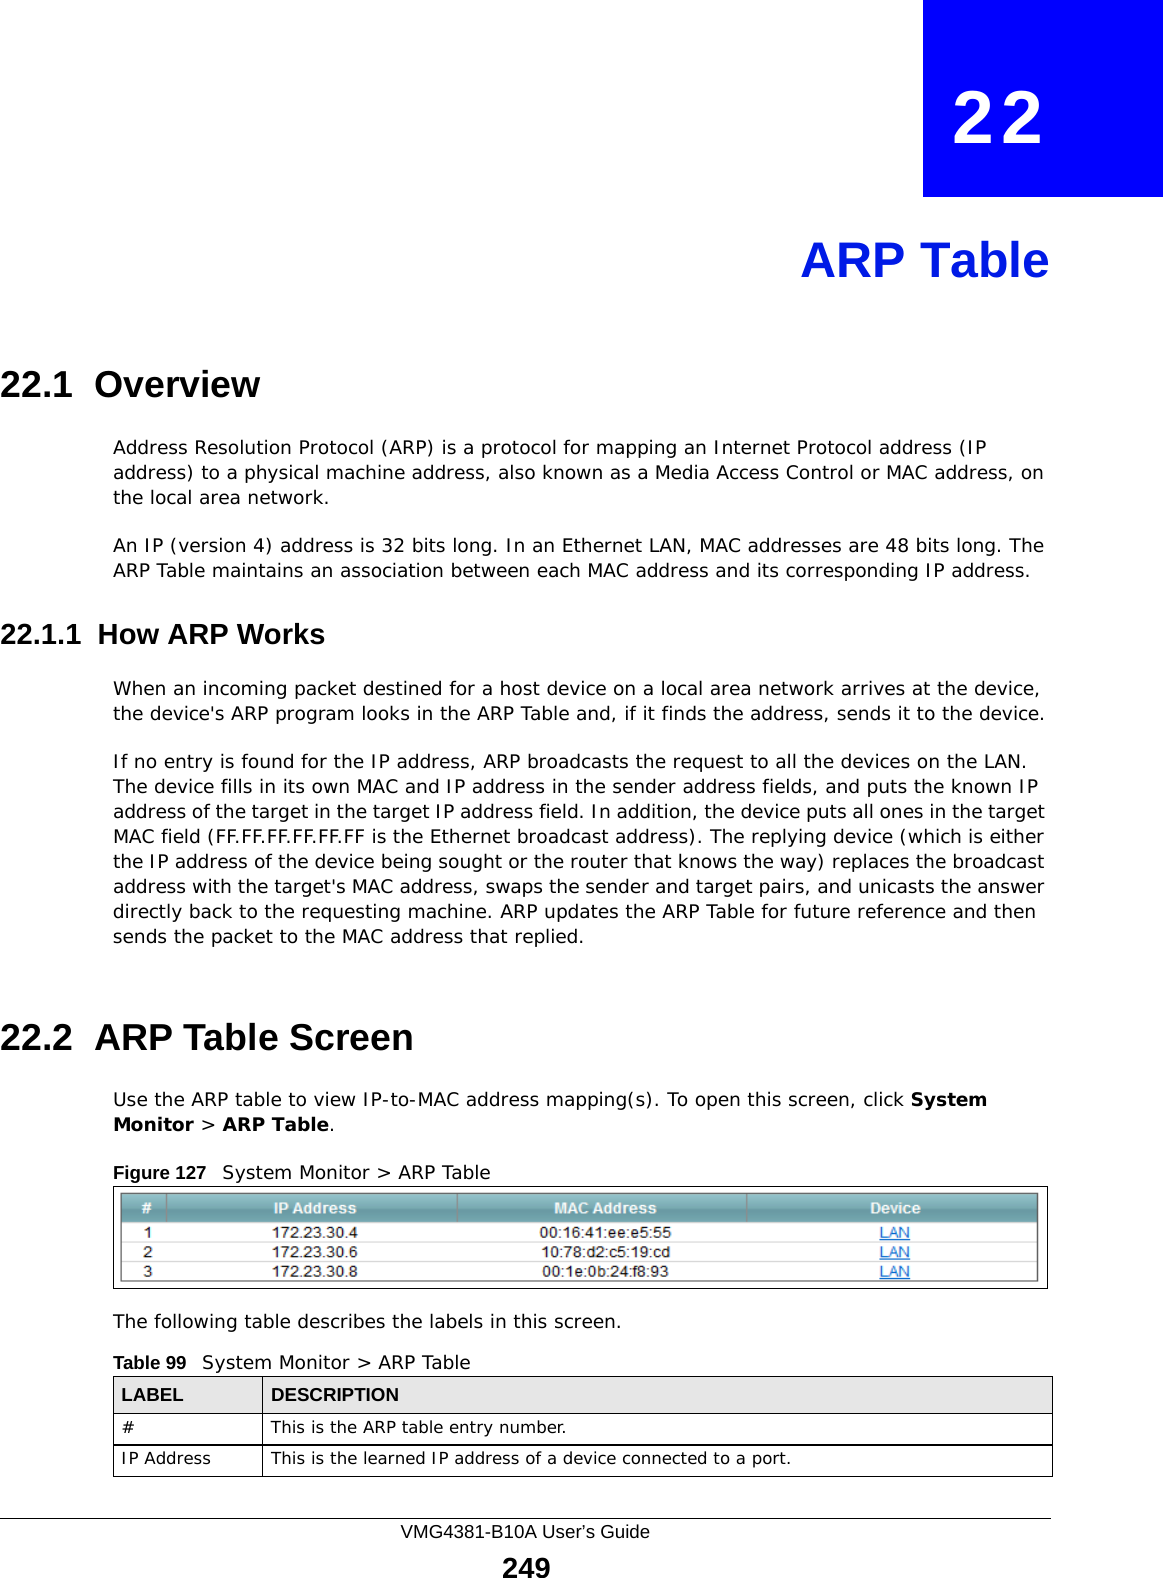 VMG4381-B10A User’s Guide249CHAPTER   22ARP Table22.1  OverviewAddress Resolution Protocol (ARP) is a protocol for mapping an Internet Protocol address (IP address) to a physical machine address, also known as a Media Access Control or MAC address, on the local area network. An IP (version 4) address is 32 bits long. In an Ethernet LAN, MAC addresses are 48 bits long. The ARP Table maintains an association between each MAC address and its corresponding IP address. 22.1.1  How ARP WorksWhen an incoming packet destined for a host device on a local area network arrives at the device, the device&apos;s ARP program looks in the ARP Table and, if it finds the address, sends it to the device.If no entry is found for the IP address, ARP broadcasts the request to all the devices on the LAN. The device fills in its own MAC and IP address in the sender address fields, and puts the known IP address of the target in the target IP address field. In addition, the device puts all ones in the target MAC field (FF.FF.FF.FF.FF.FF is the Ethernet broadcast address). The replying device (which is either the IP address of the device being sought or the router that knows the way) replaces the broadcast address with the target&apos;s MAC address, swaps the sender and target pairs, and unicasts the answer directly back to the requesting machine. ARP updates the ARP Table for future reference and then sends the packet to the MAC address that replied. 22.2  ARP Table ScreenUse the ARP table to view IP-to-MAC address mapping(s). To open this screen, click System Monitor &gt; ARP Table.Figure 127   System Monitor &gt; ARP TableThe following table describes the labels in this screen.Table 99   System Monitor &gt; ARP TableLABEL DESCRIPTION# This is the ARP table entry number.IP Address This is the learned IP address of a device connected to a port.